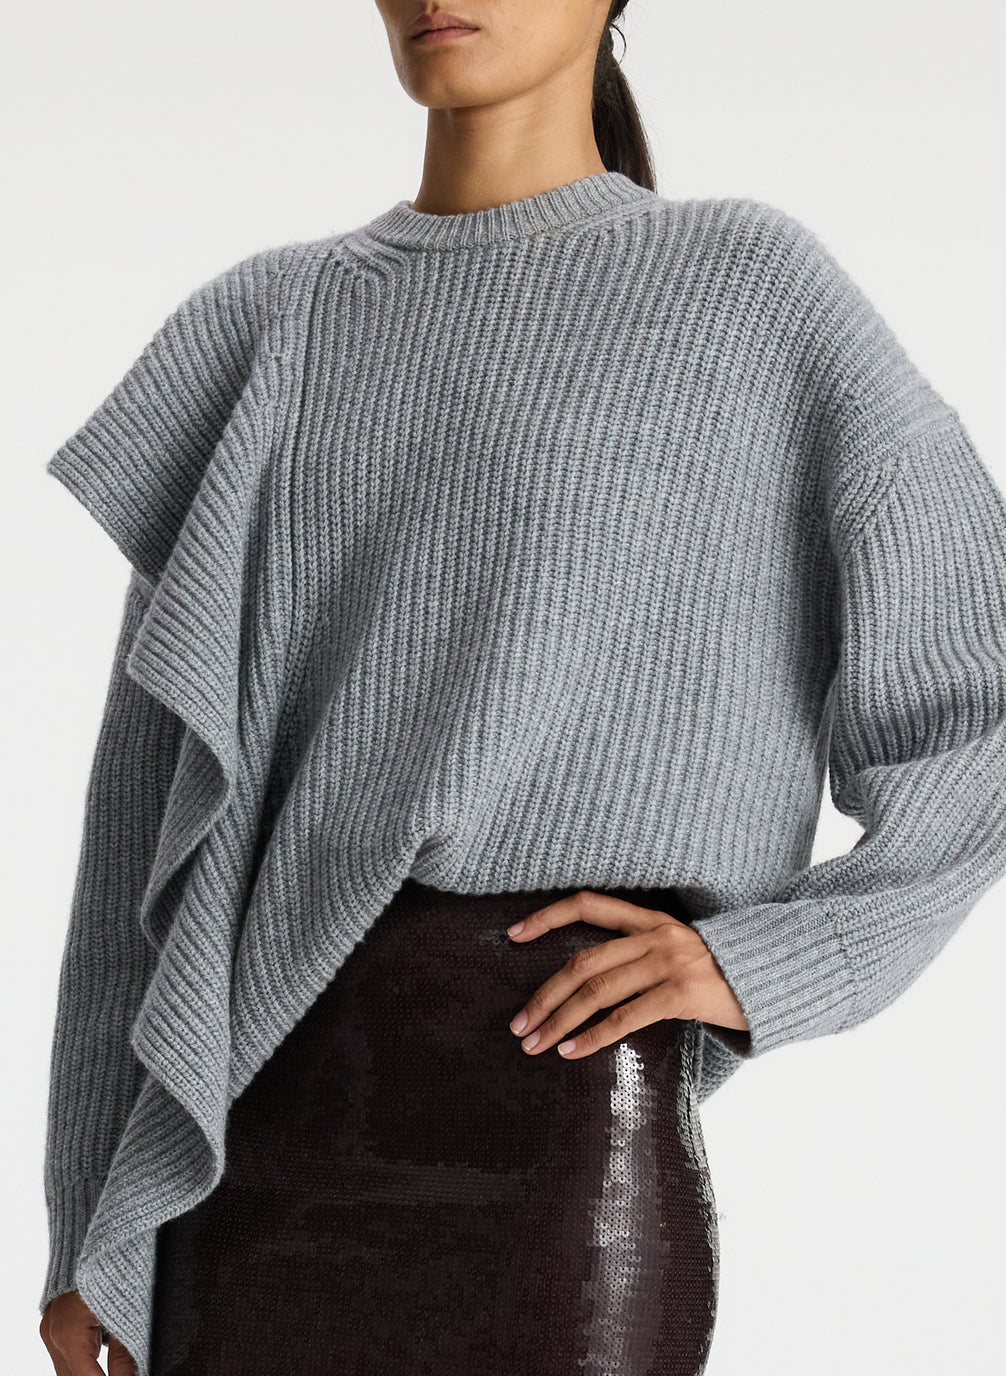 detail view of woman wearing grey sweater with ruffle and brown sequin midi skirt